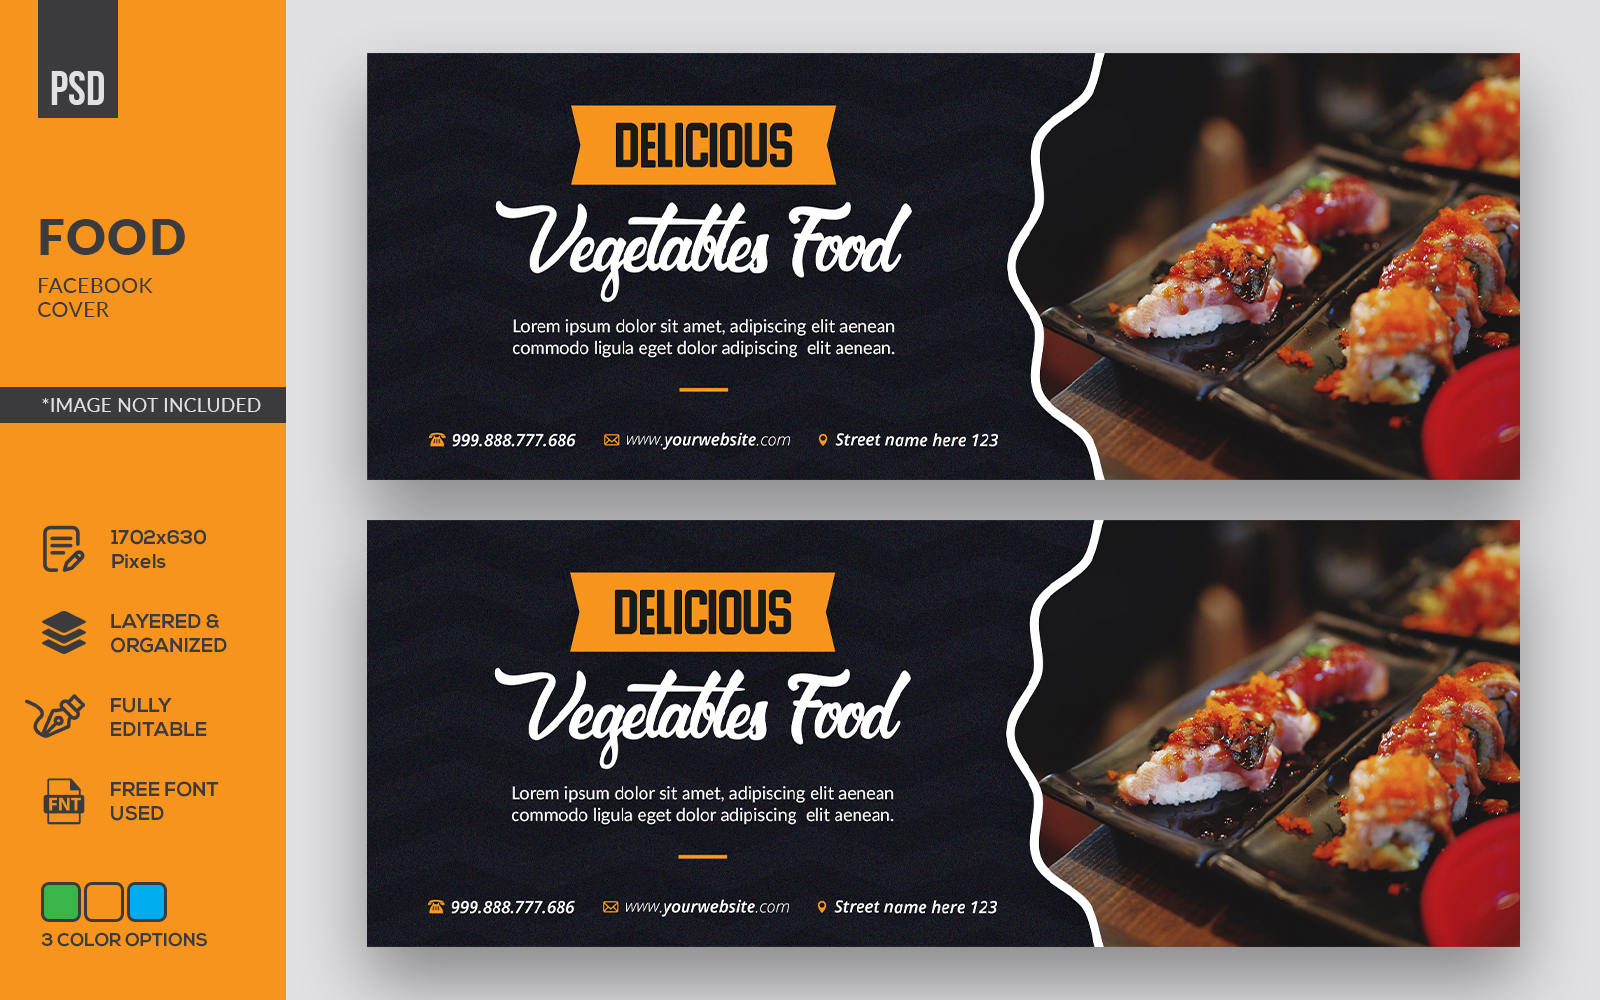 Food Facebook Cover - Corporate Identity Template